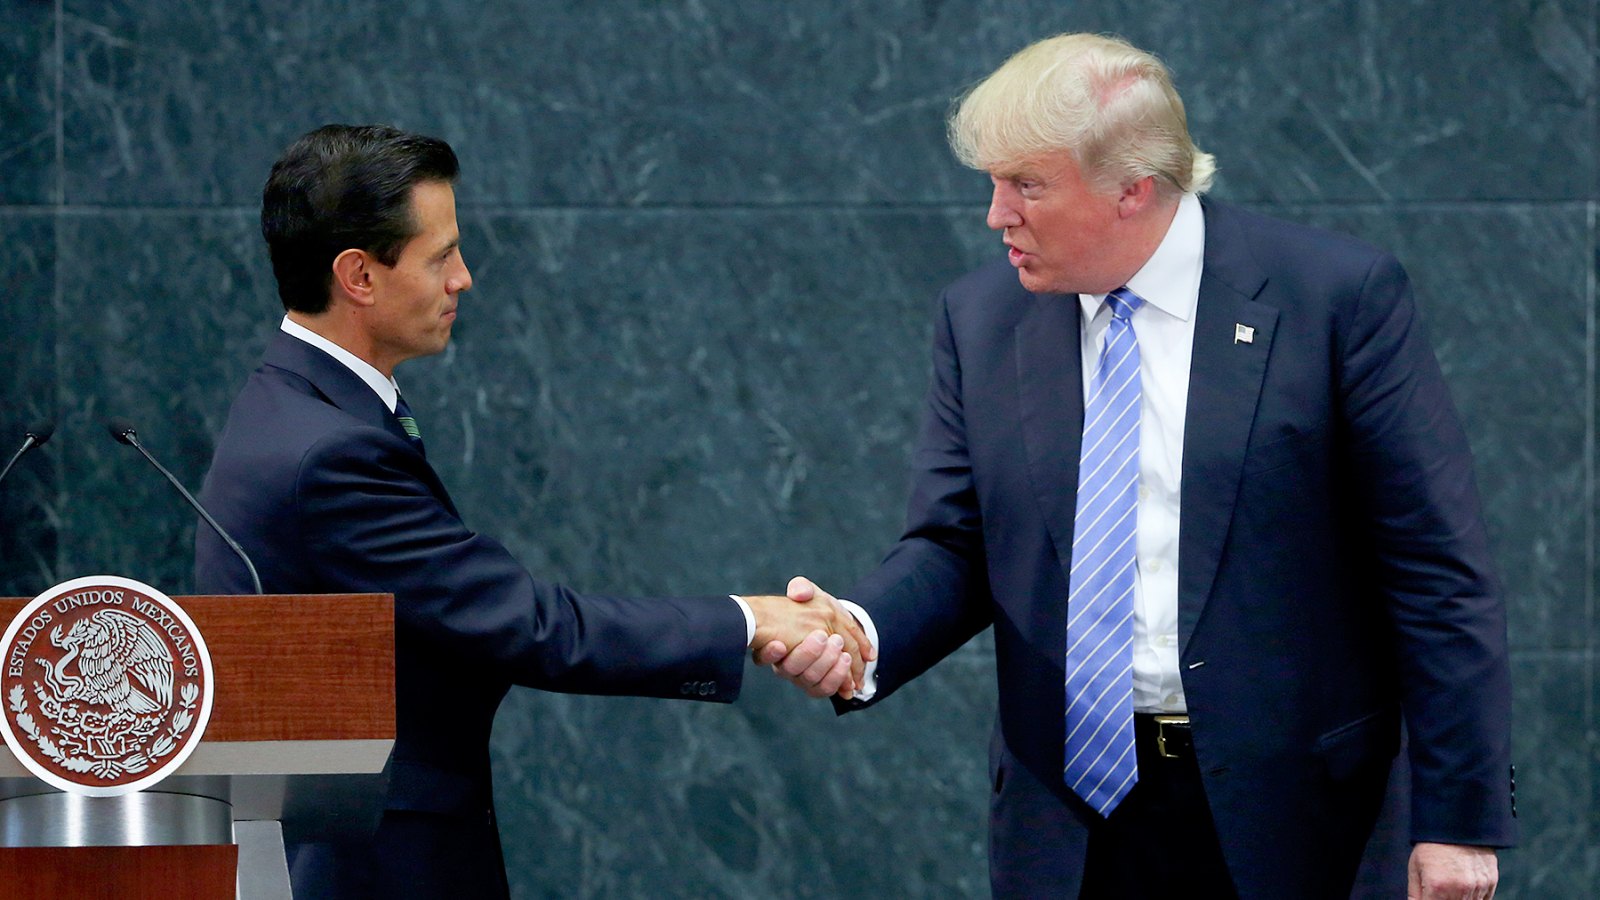 Mexican President Enrique Peña Nieto greets Donald Trump during a meeting at Los Pinos in Mexico City, Mexico, on August 31, 2016.